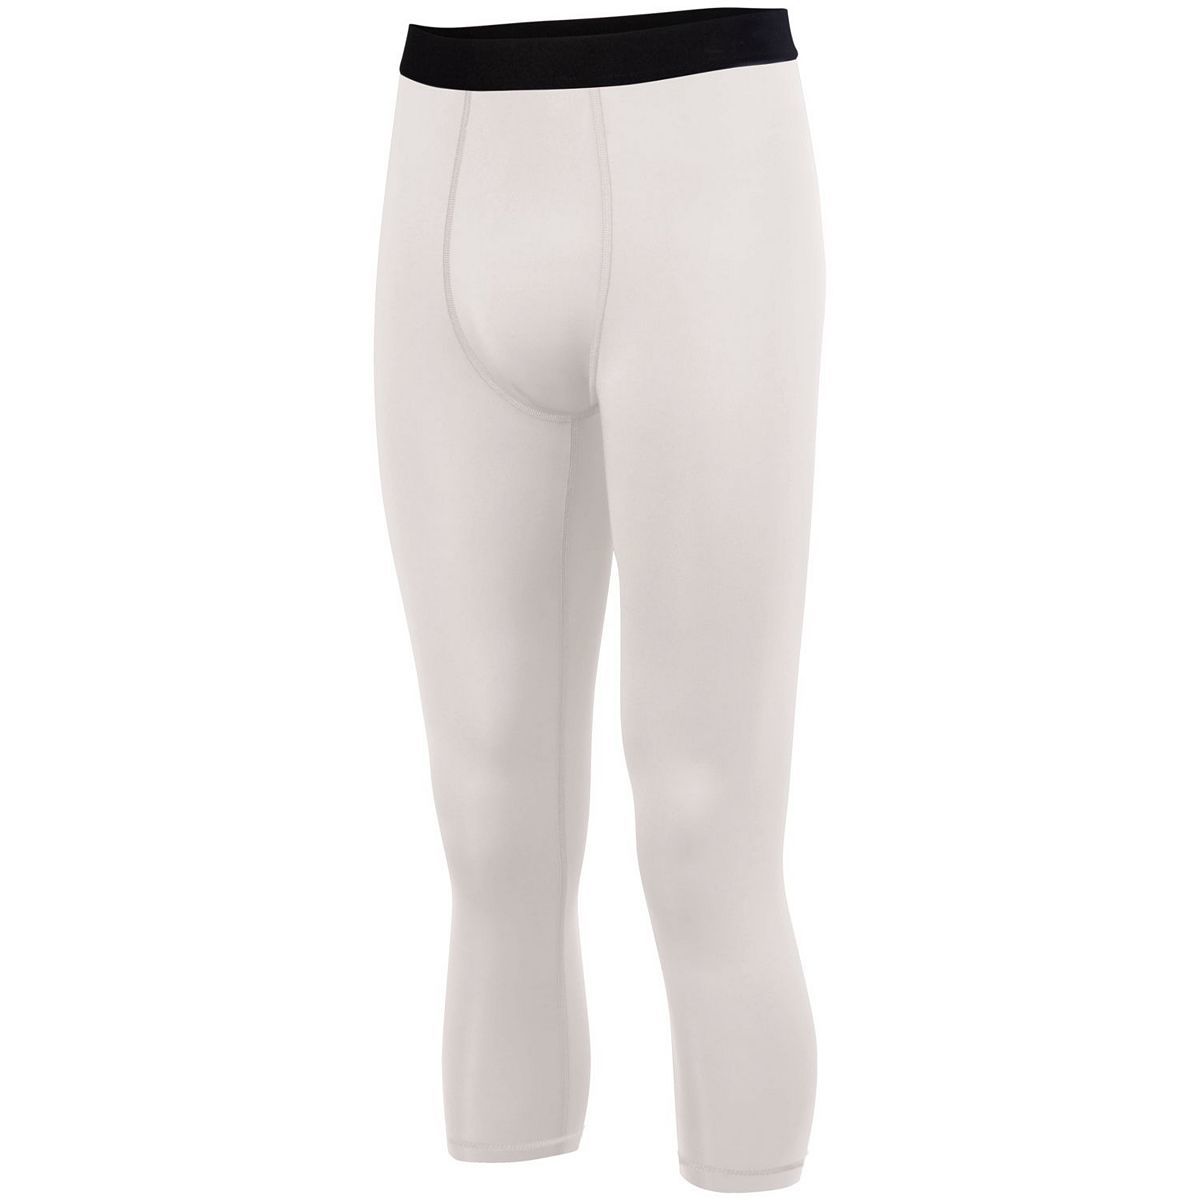 Augusta Sportswear Hyperform Compression Calf-Length Tight in White  -Part of the Adult, Augusta-Products product lines at KanaleyCreations.com